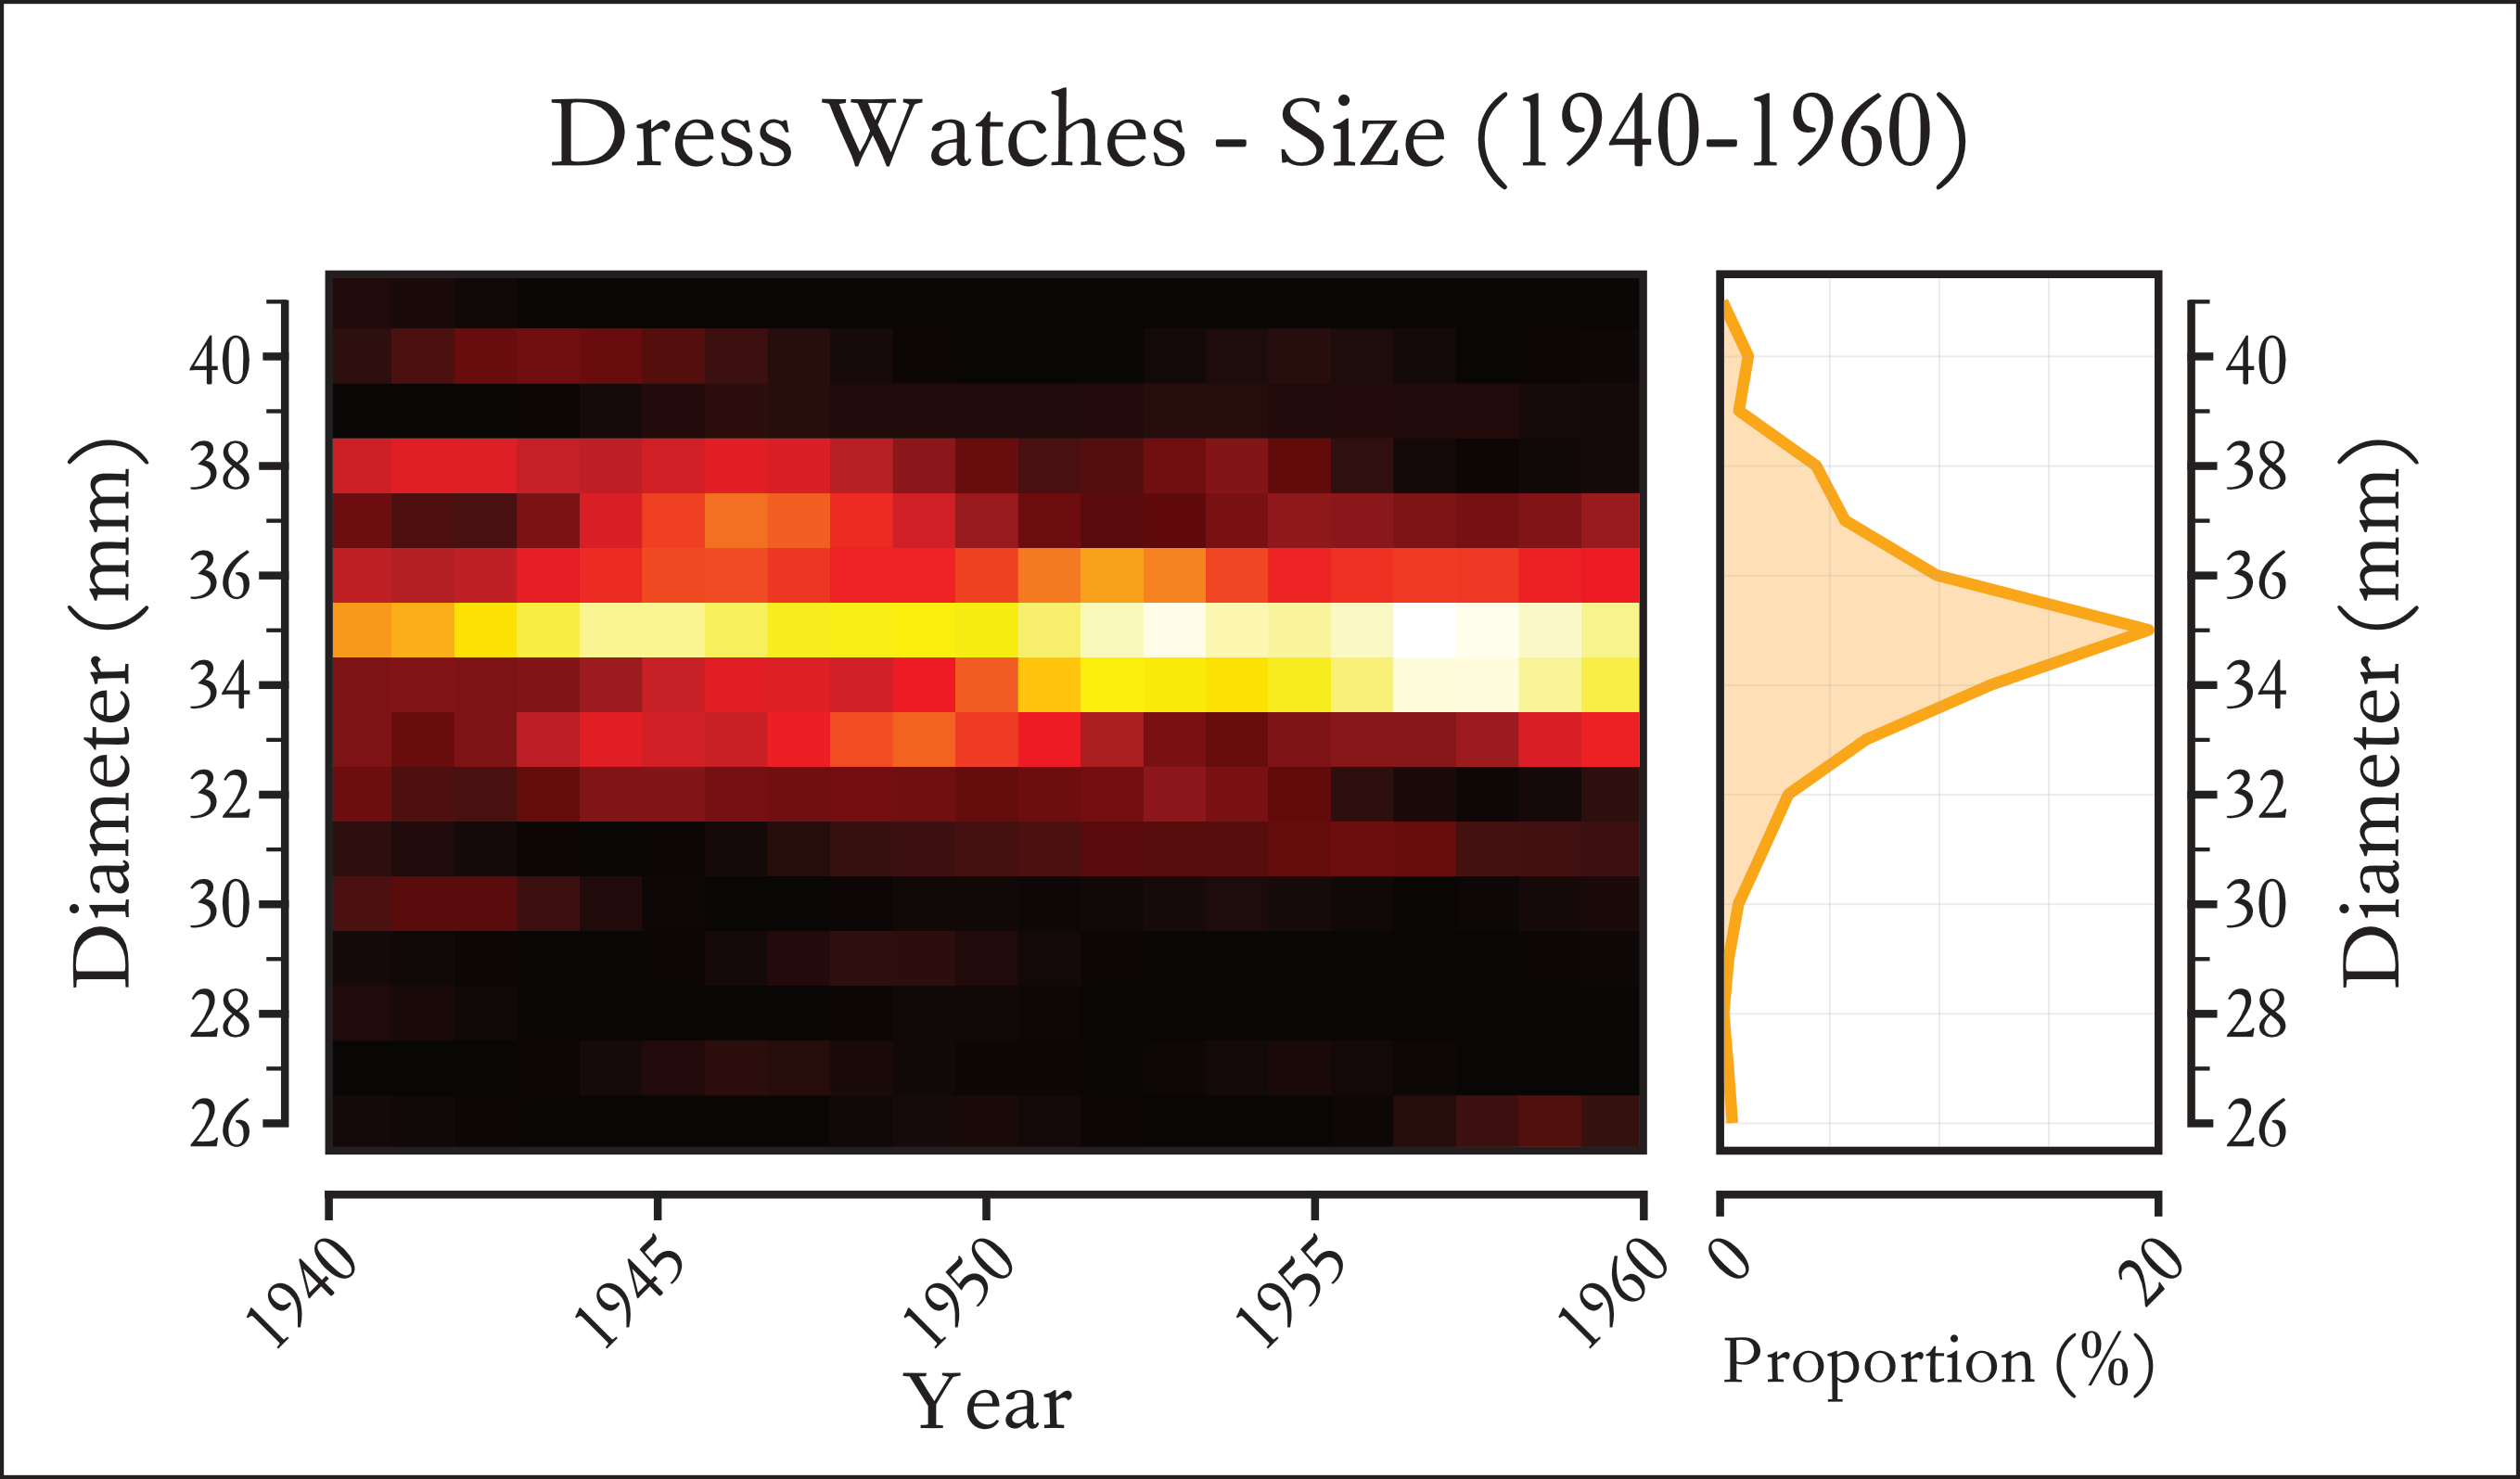 Distribution of Dress Watch Sizes from 1940 - 1960